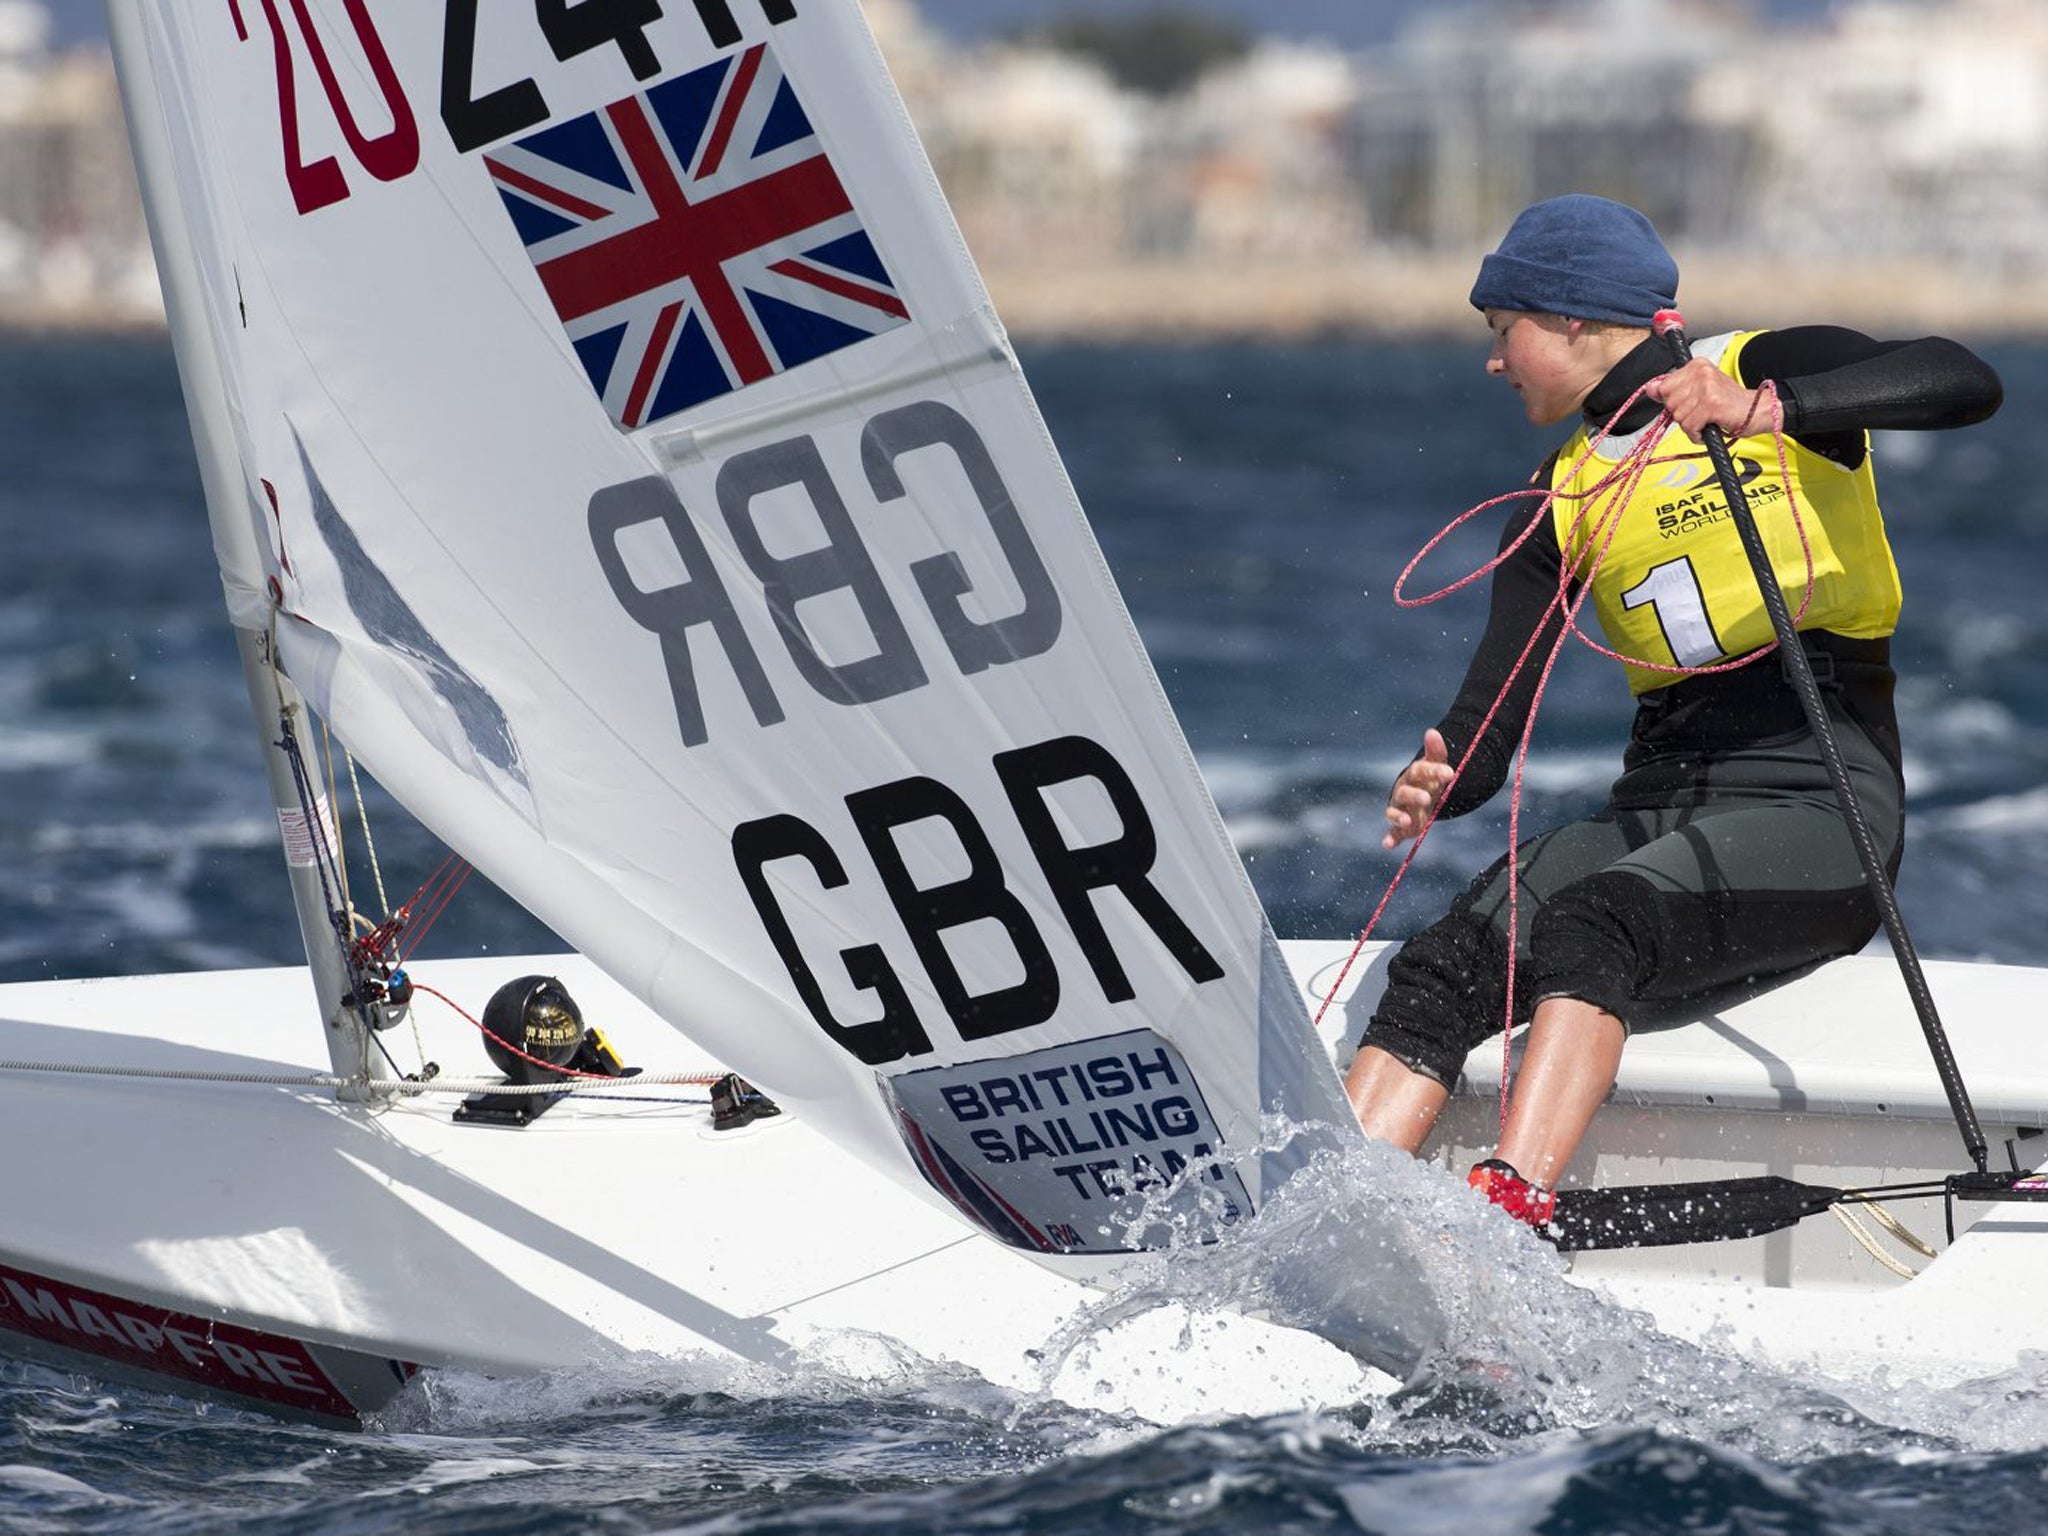 Established campaigner Alison Young put in a steely performance in the Laser Radial event